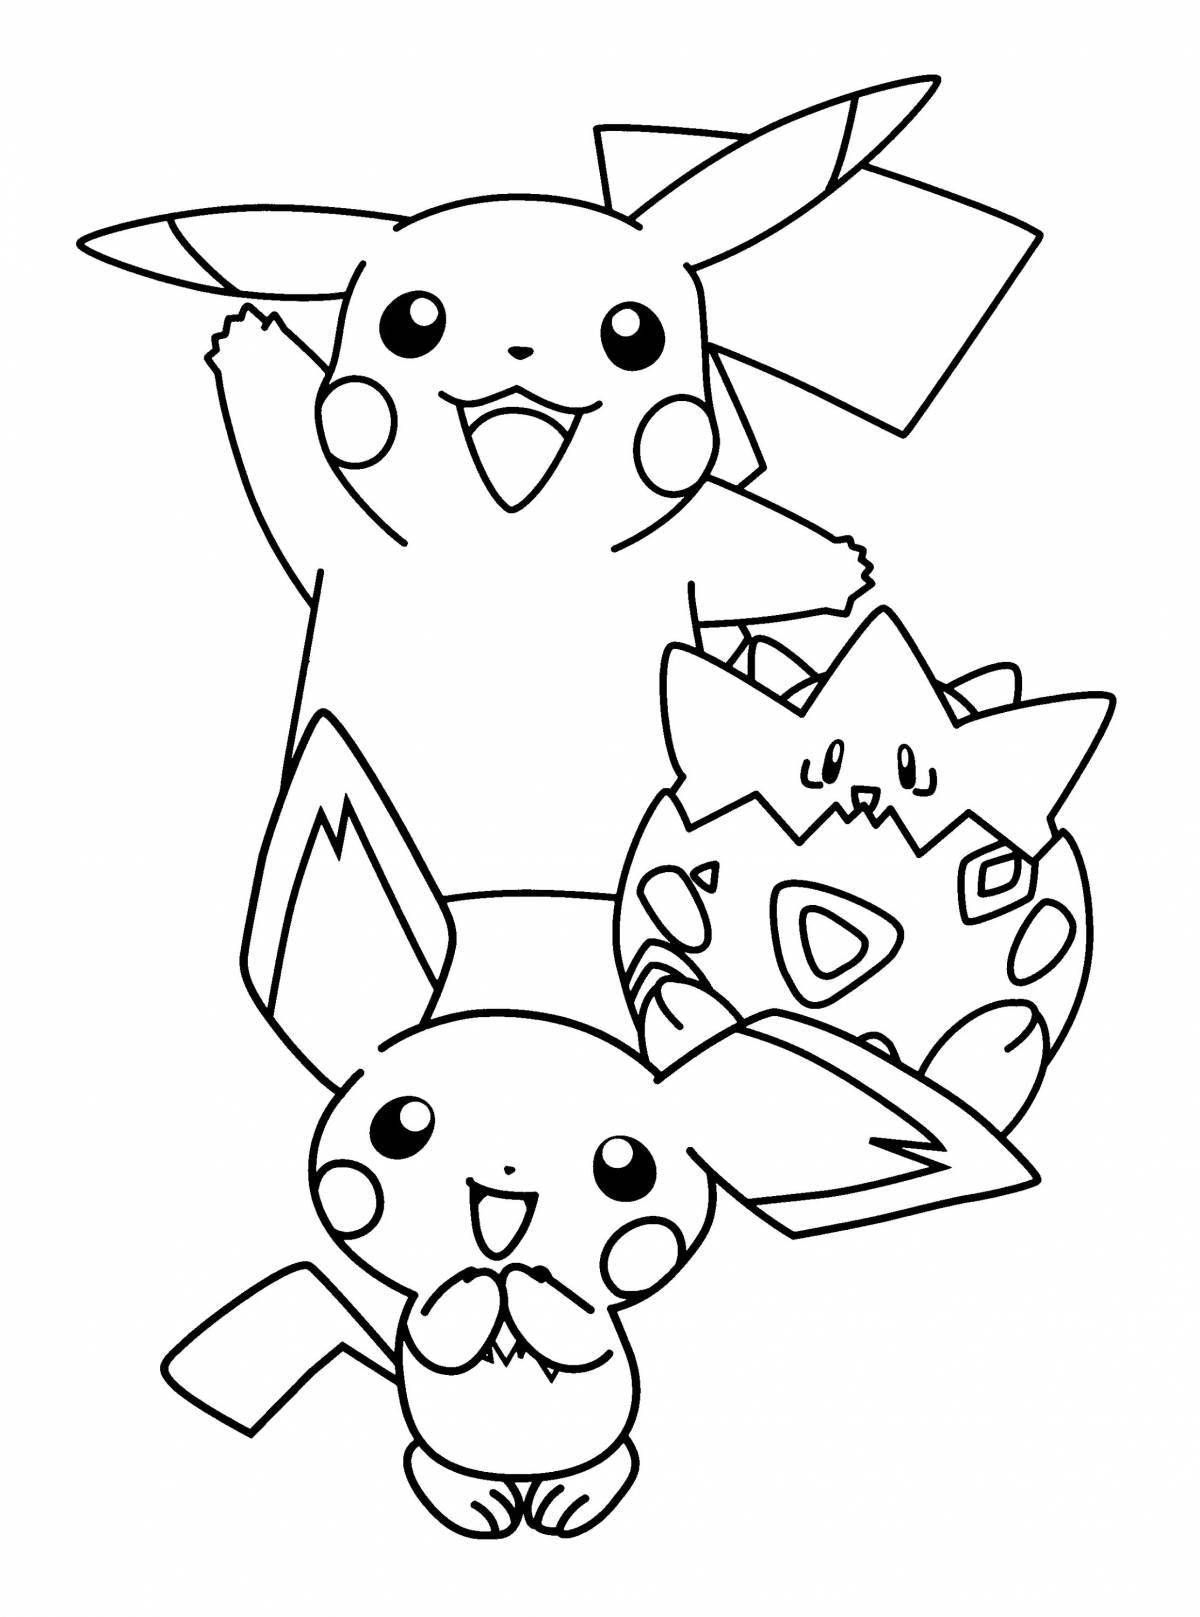 Excited pikachu and his friends